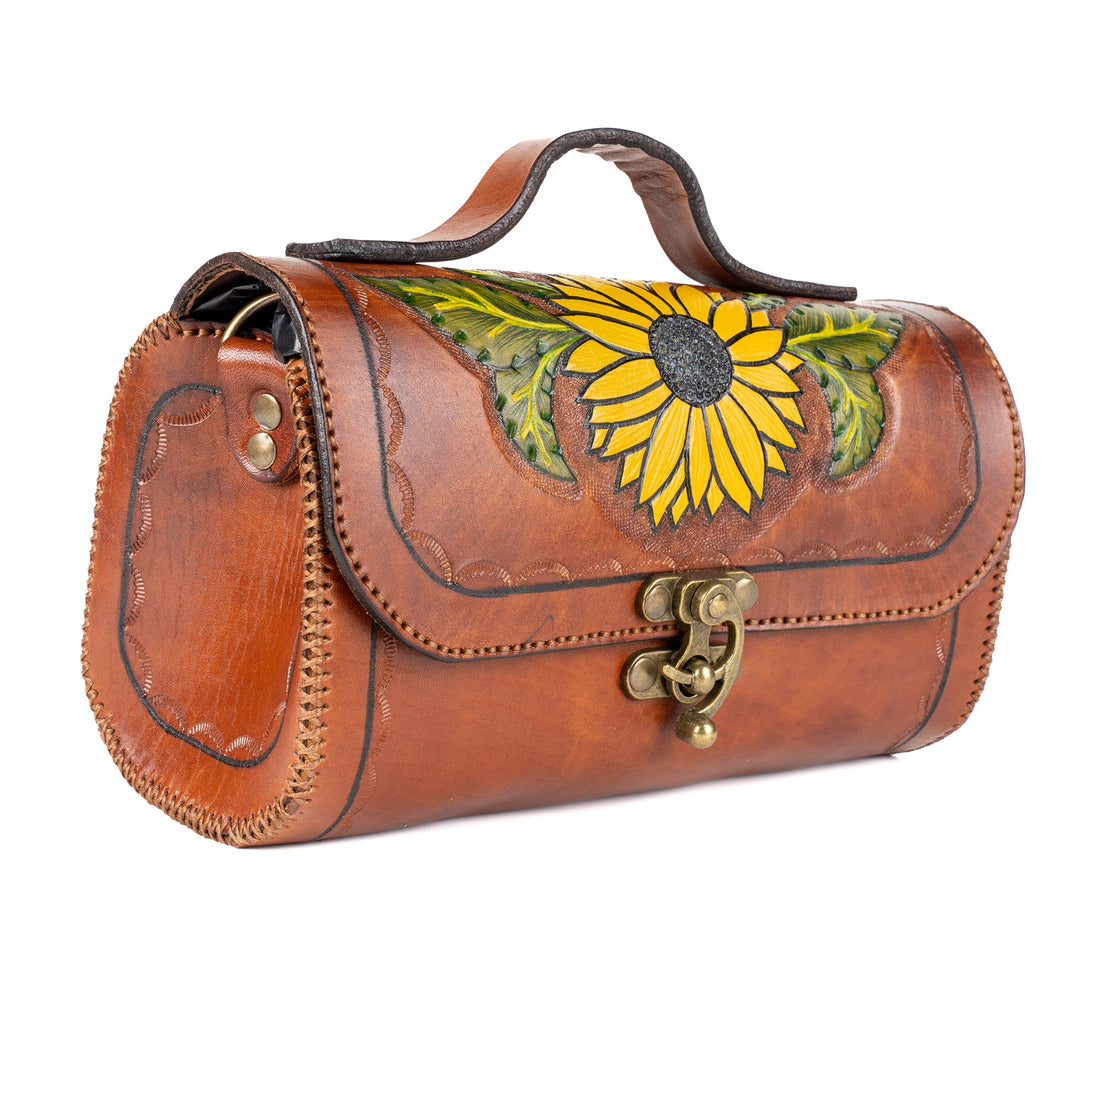 Leila Leather Carved & Crafted Hand Bag - Brown - Handbags Zengoda Shop online from Artisan Brands